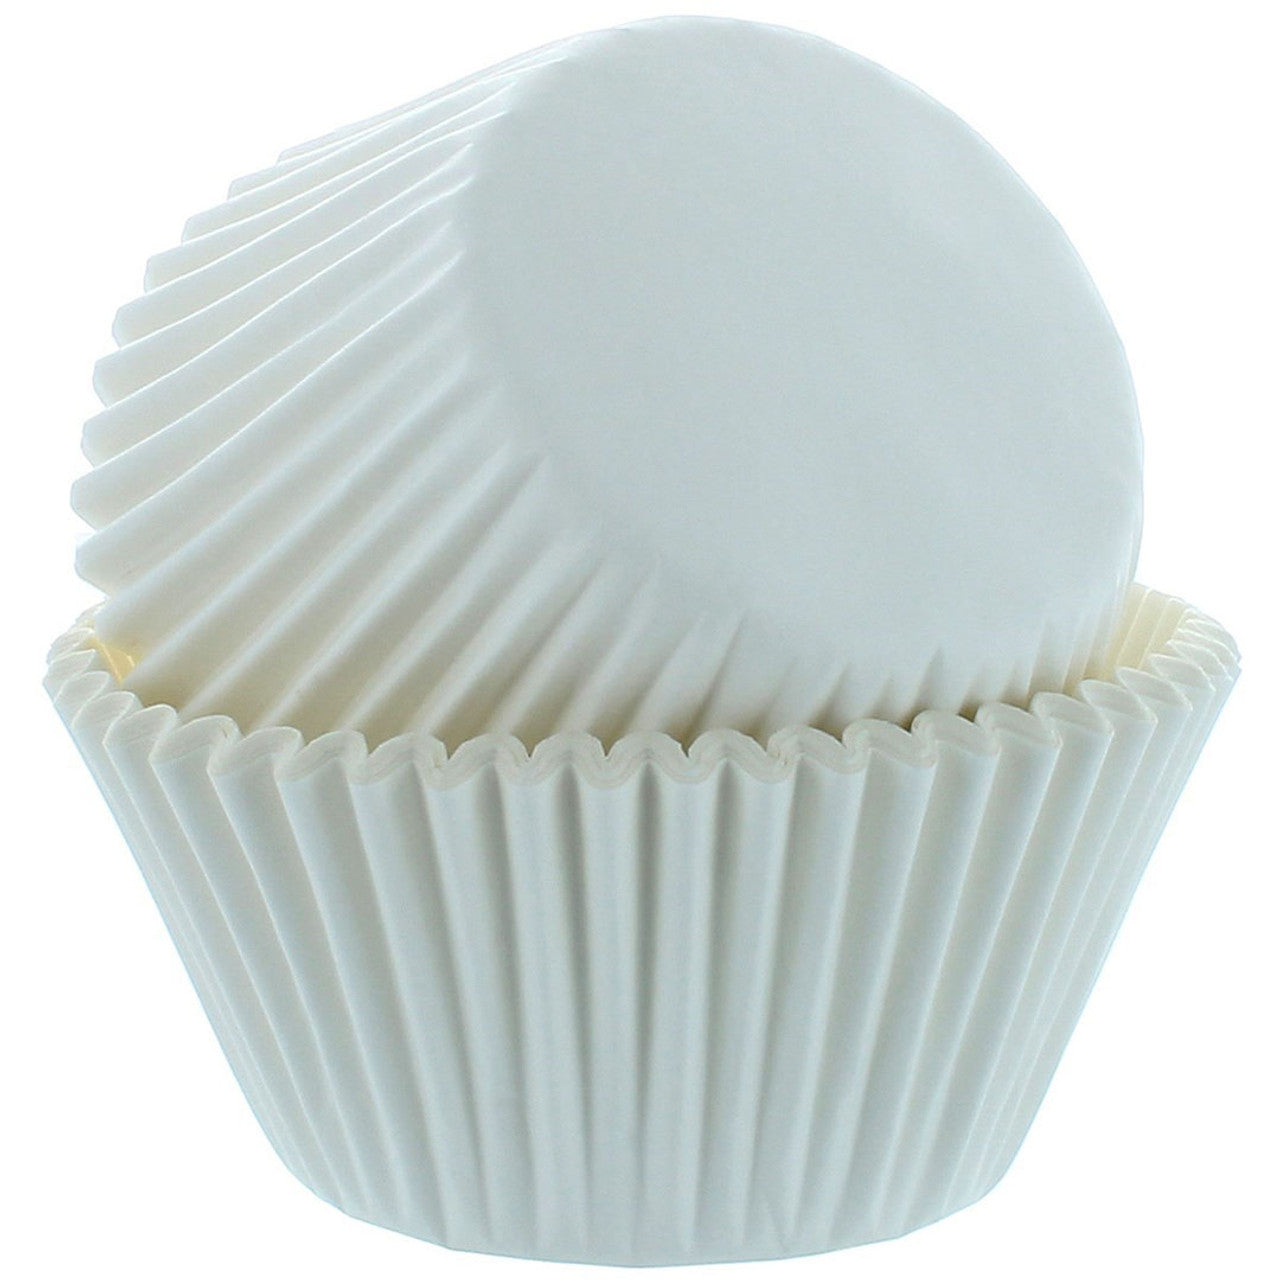 Cupcake Cases - Pack Of 100